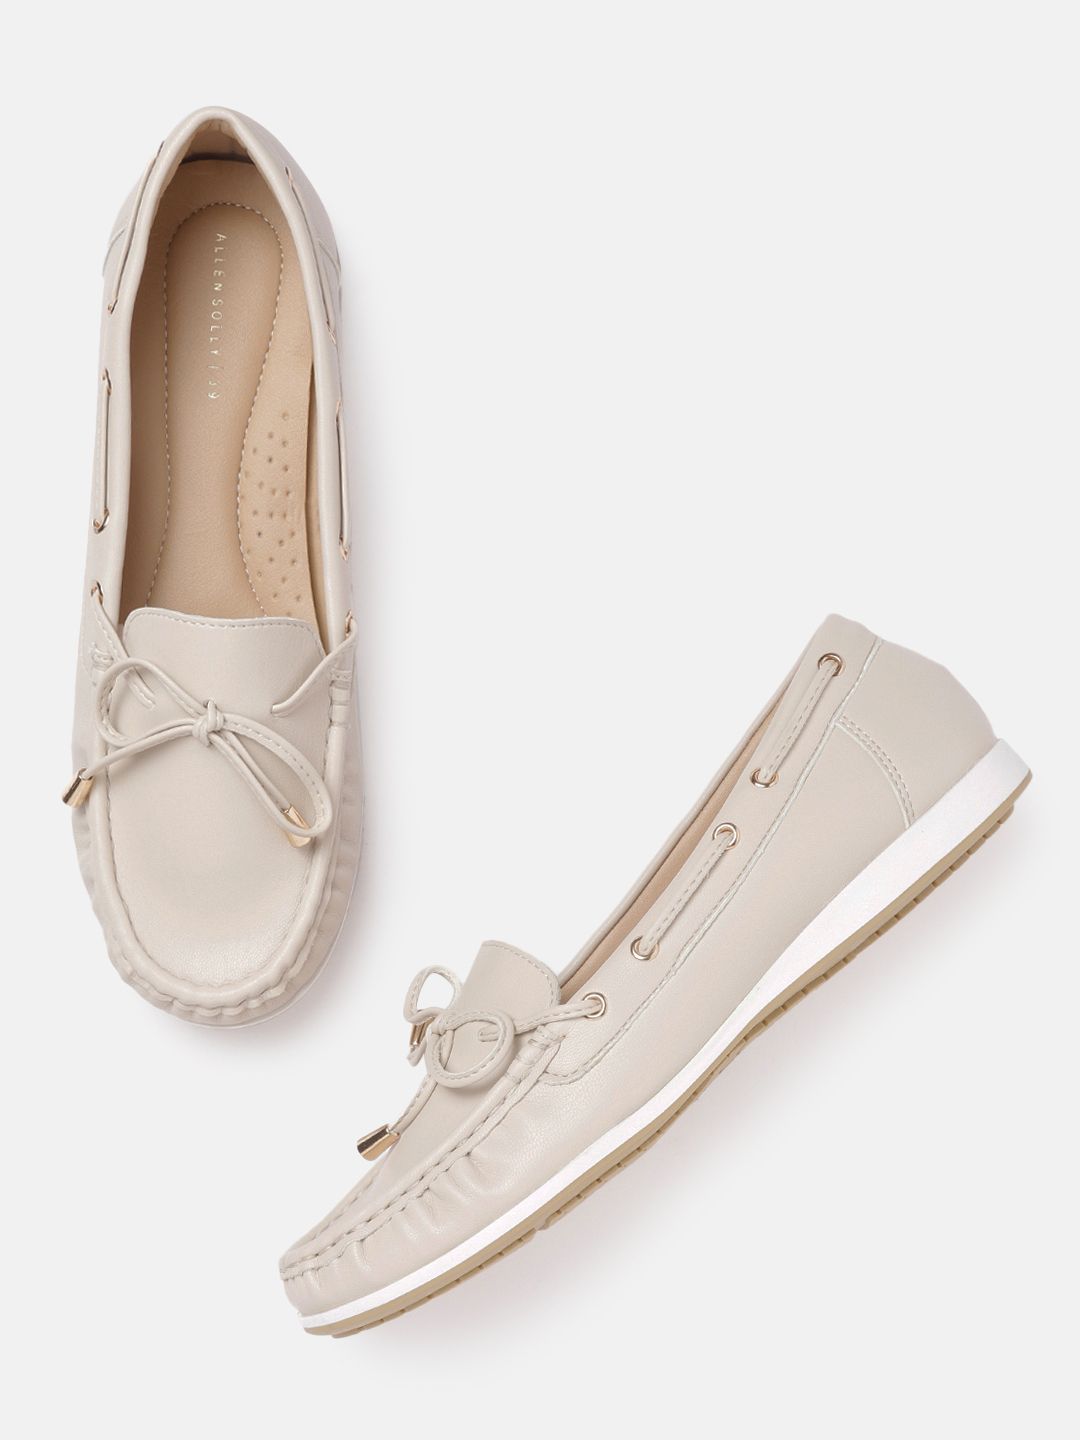 Allen Solly Women Nude-Coloured Solid Boat Shoes Price in India